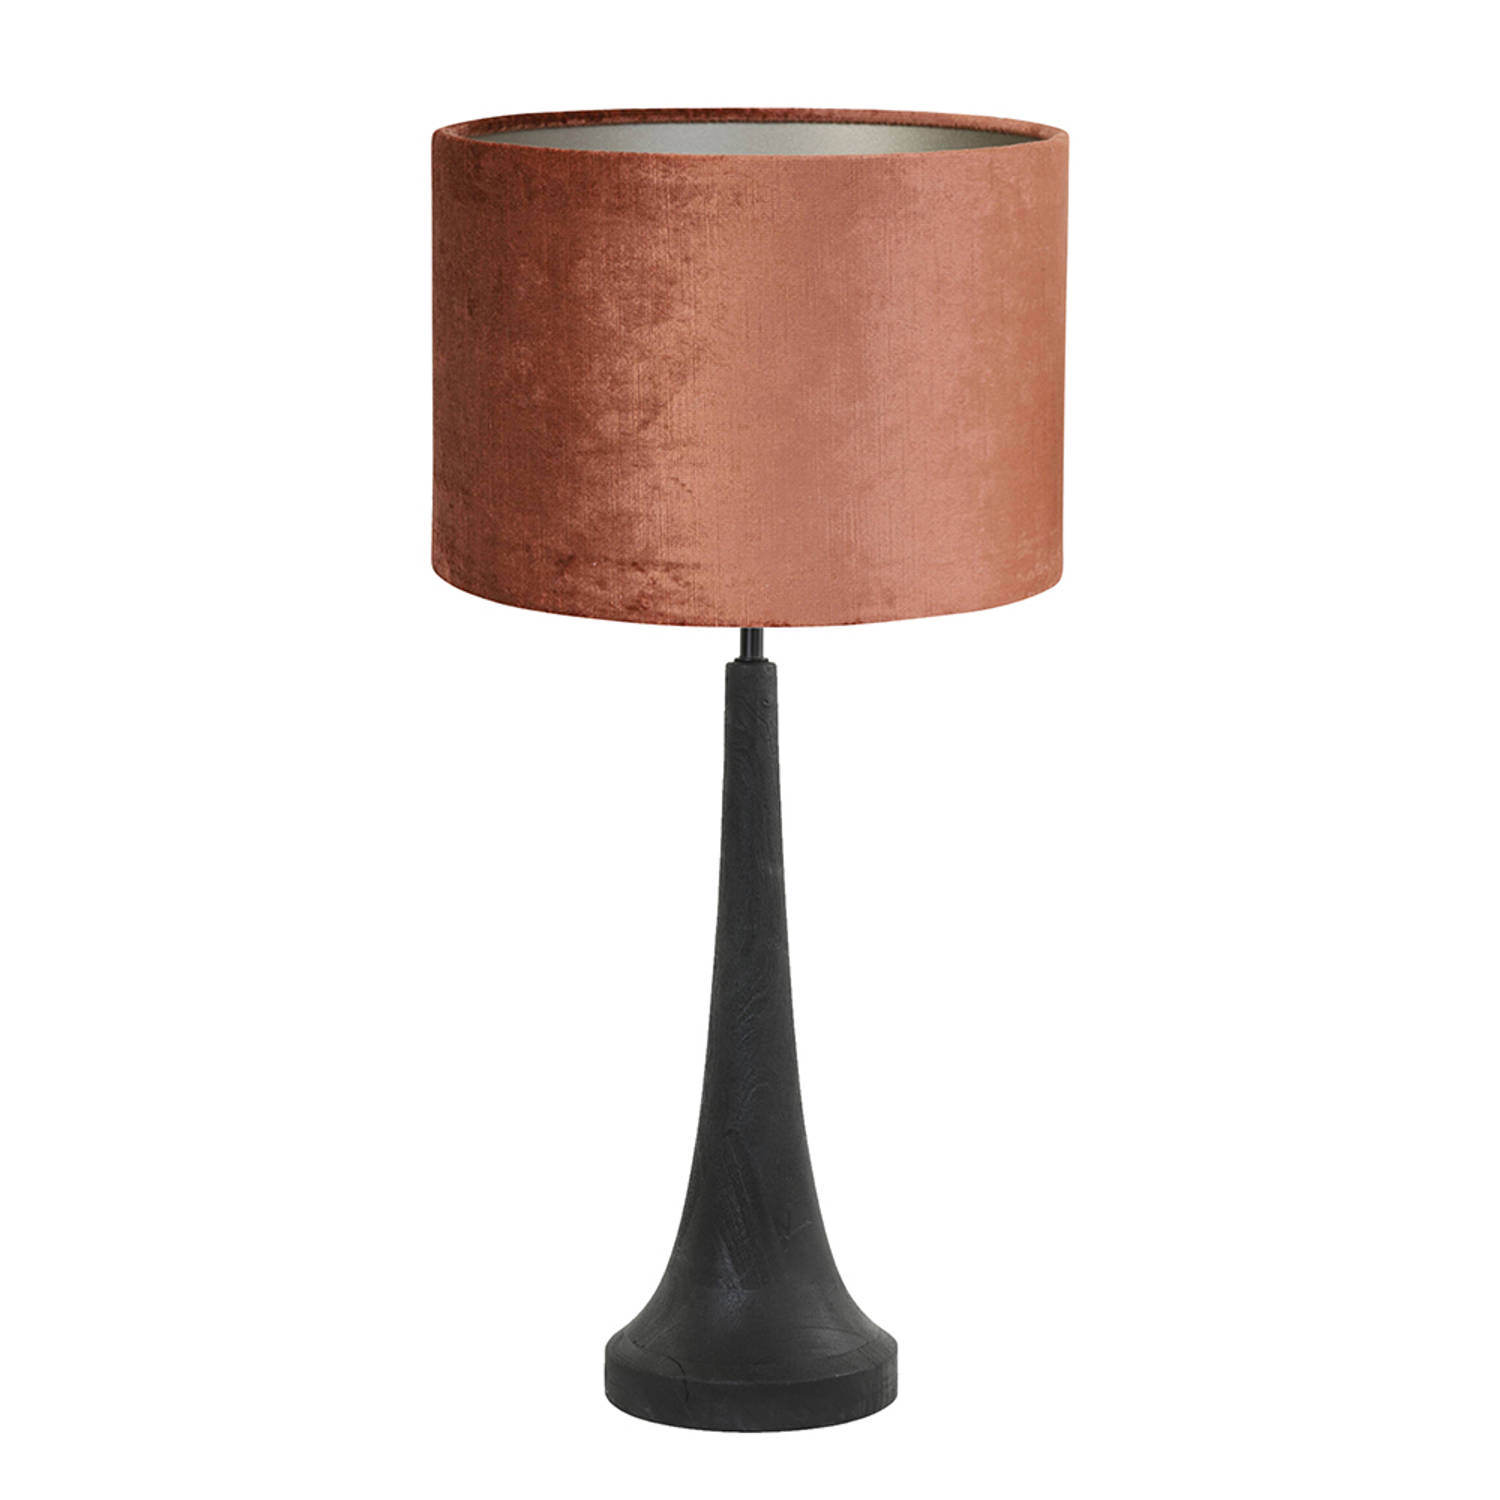 Light and Living Jovany tafellamp - Ø 40 cm - E27 (grote fitting) - rood